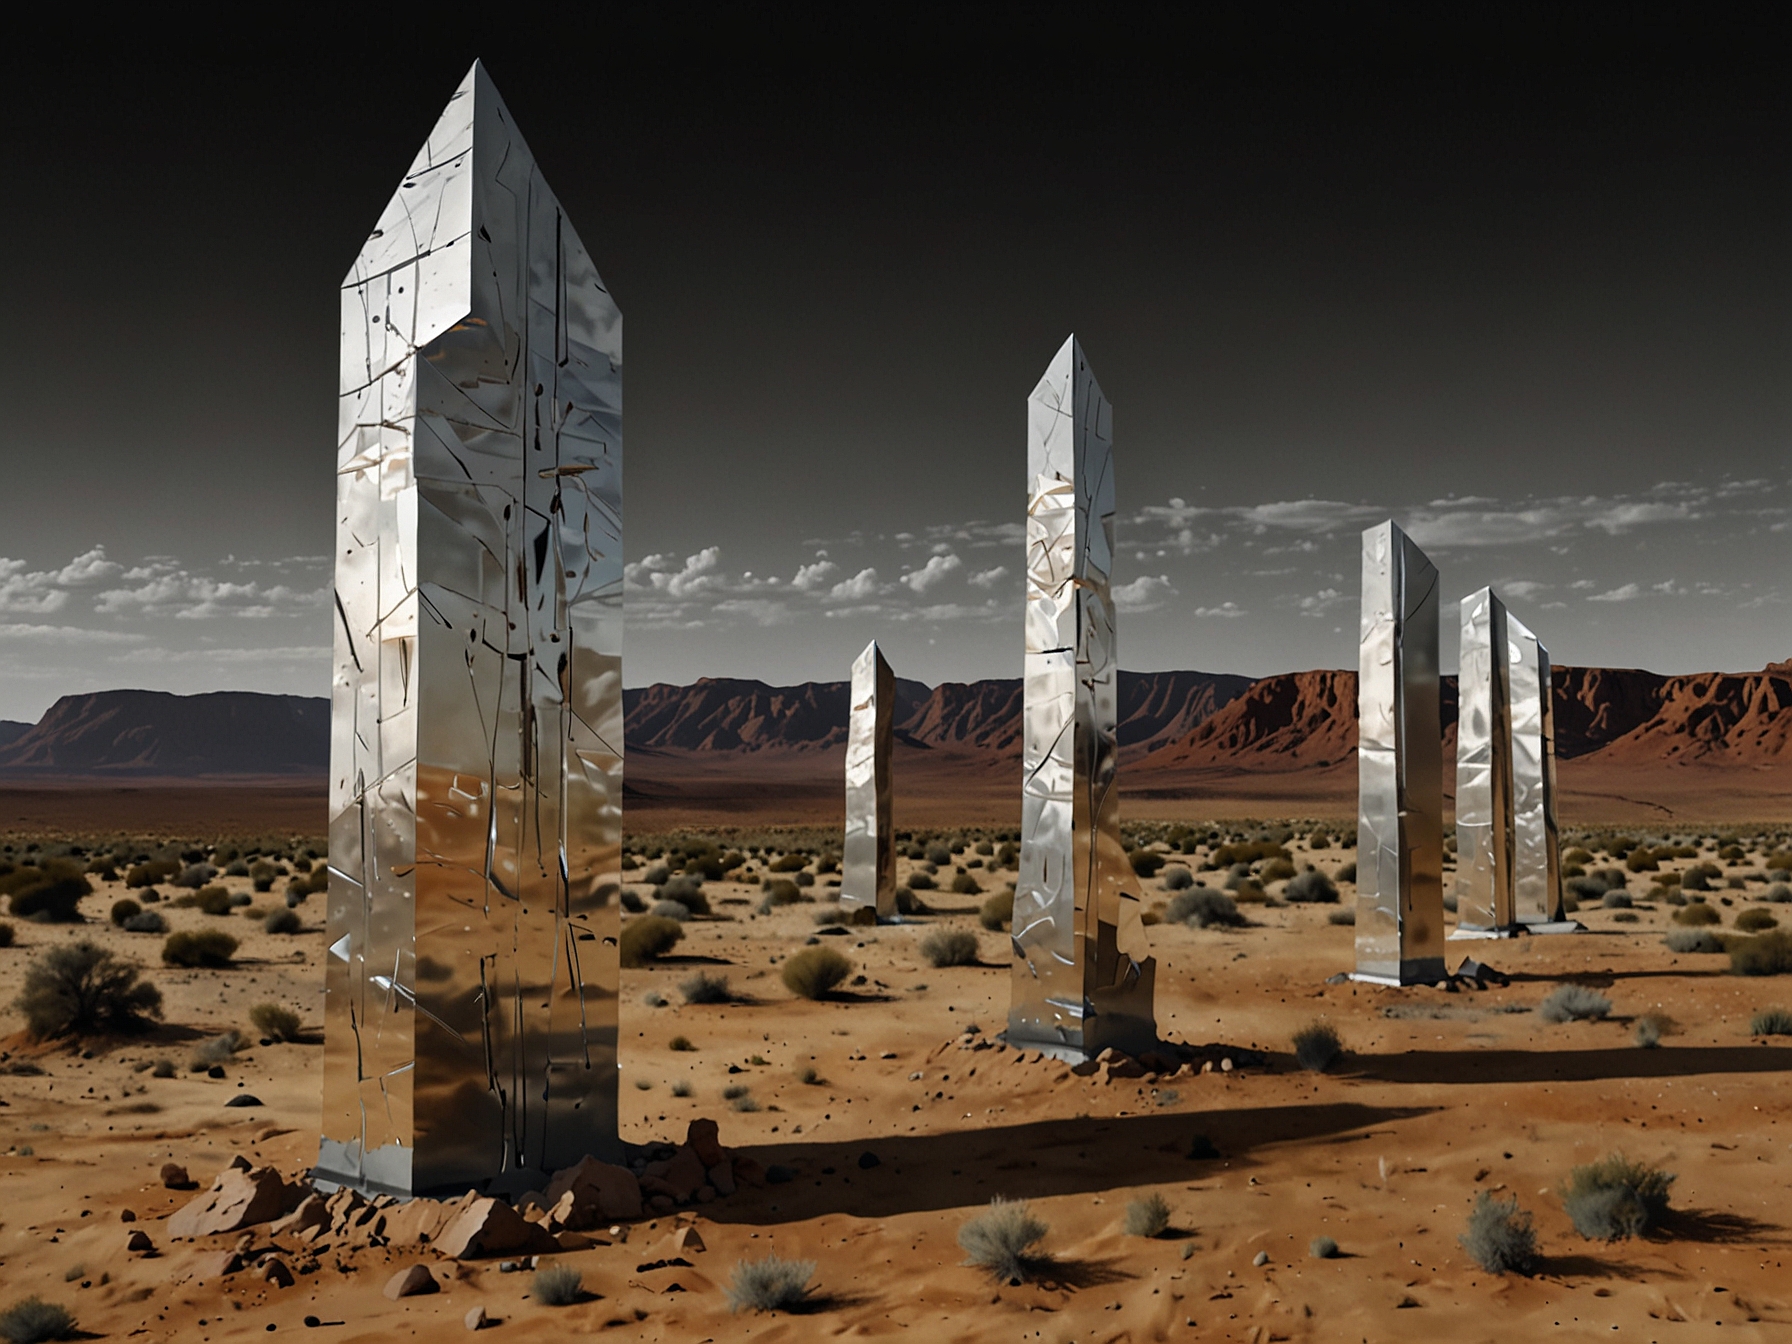 A montage of various reflective monoliths that appeared around the world, from Utah to Romania, illustrating their identical metallic, tall, and reflective features that sparked global curiosity.